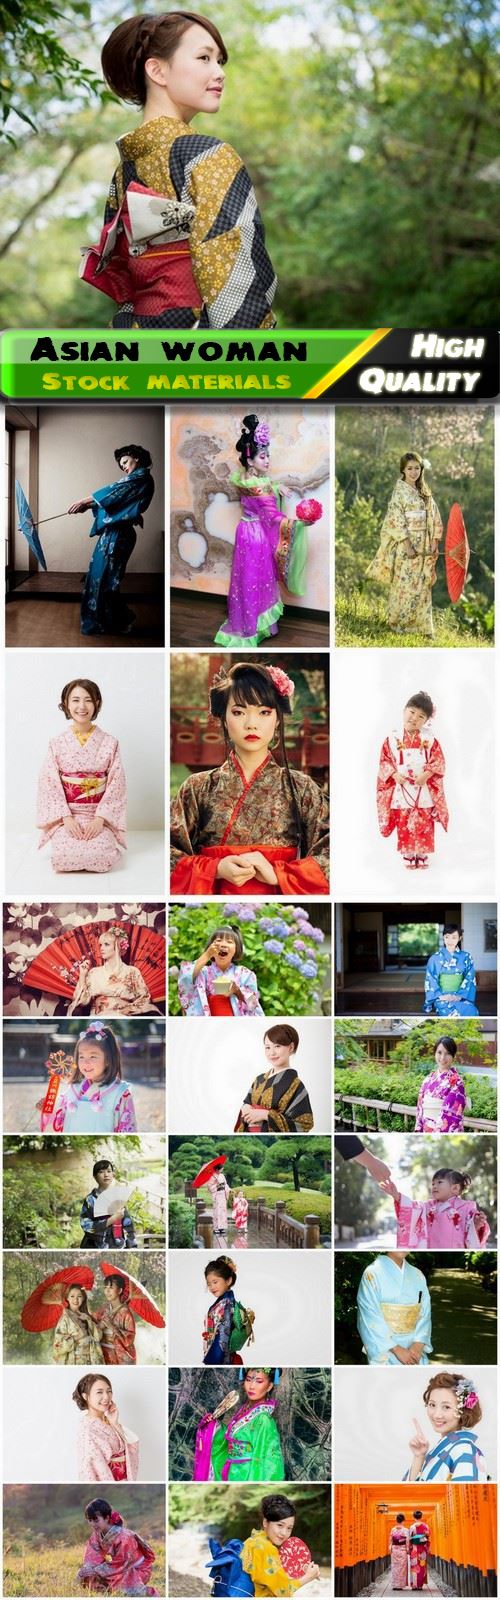 Asian woman and girl dressed in traditional japanese kimono - 25 HQ Jpg